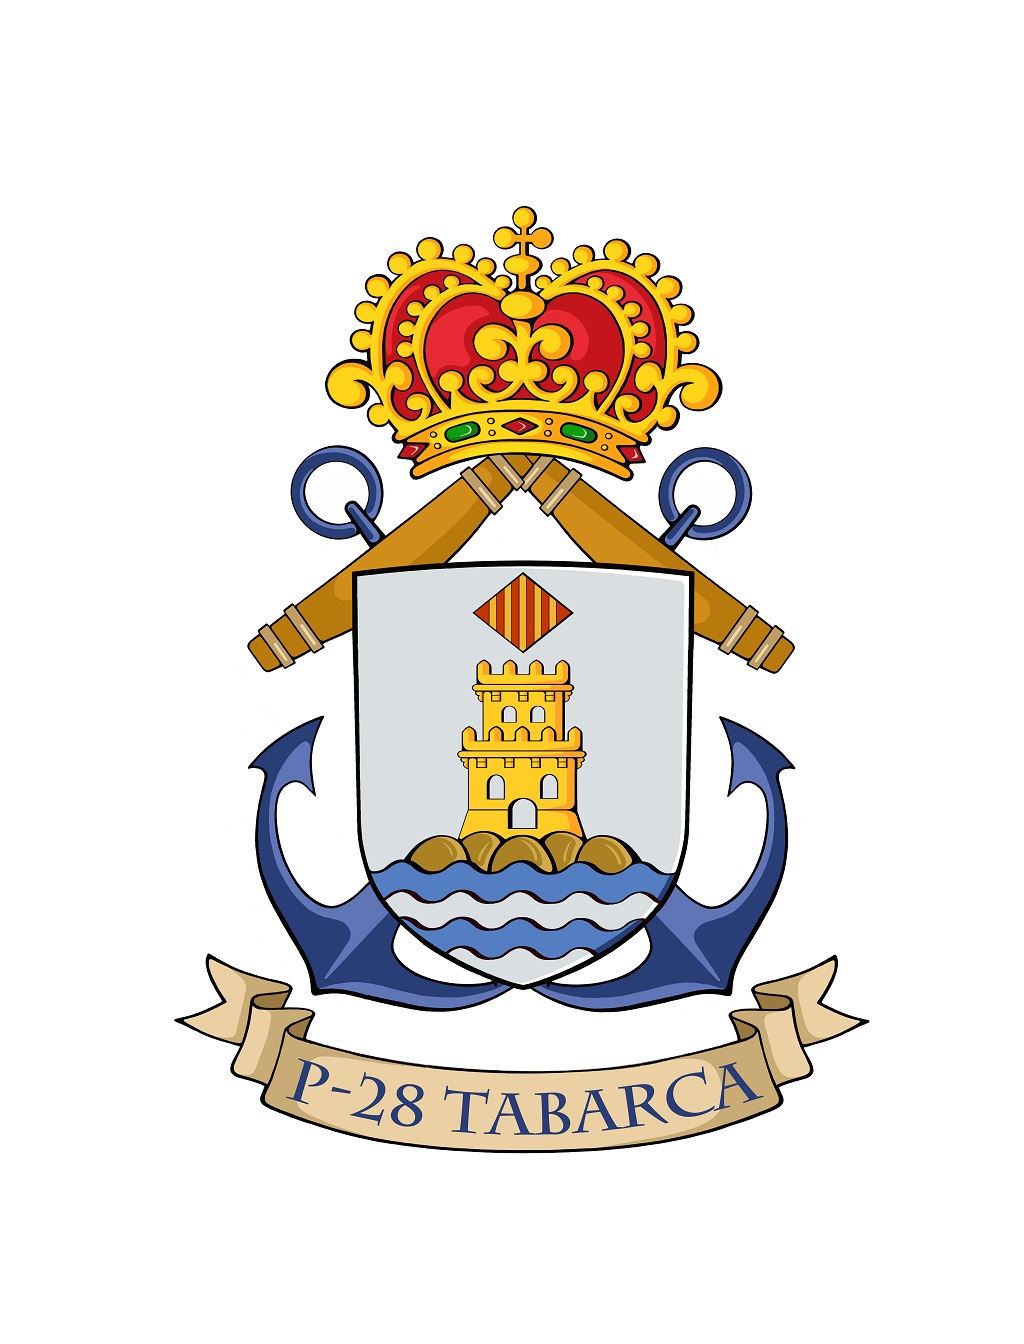 Coat of Arms "TABARCA" (P-28)